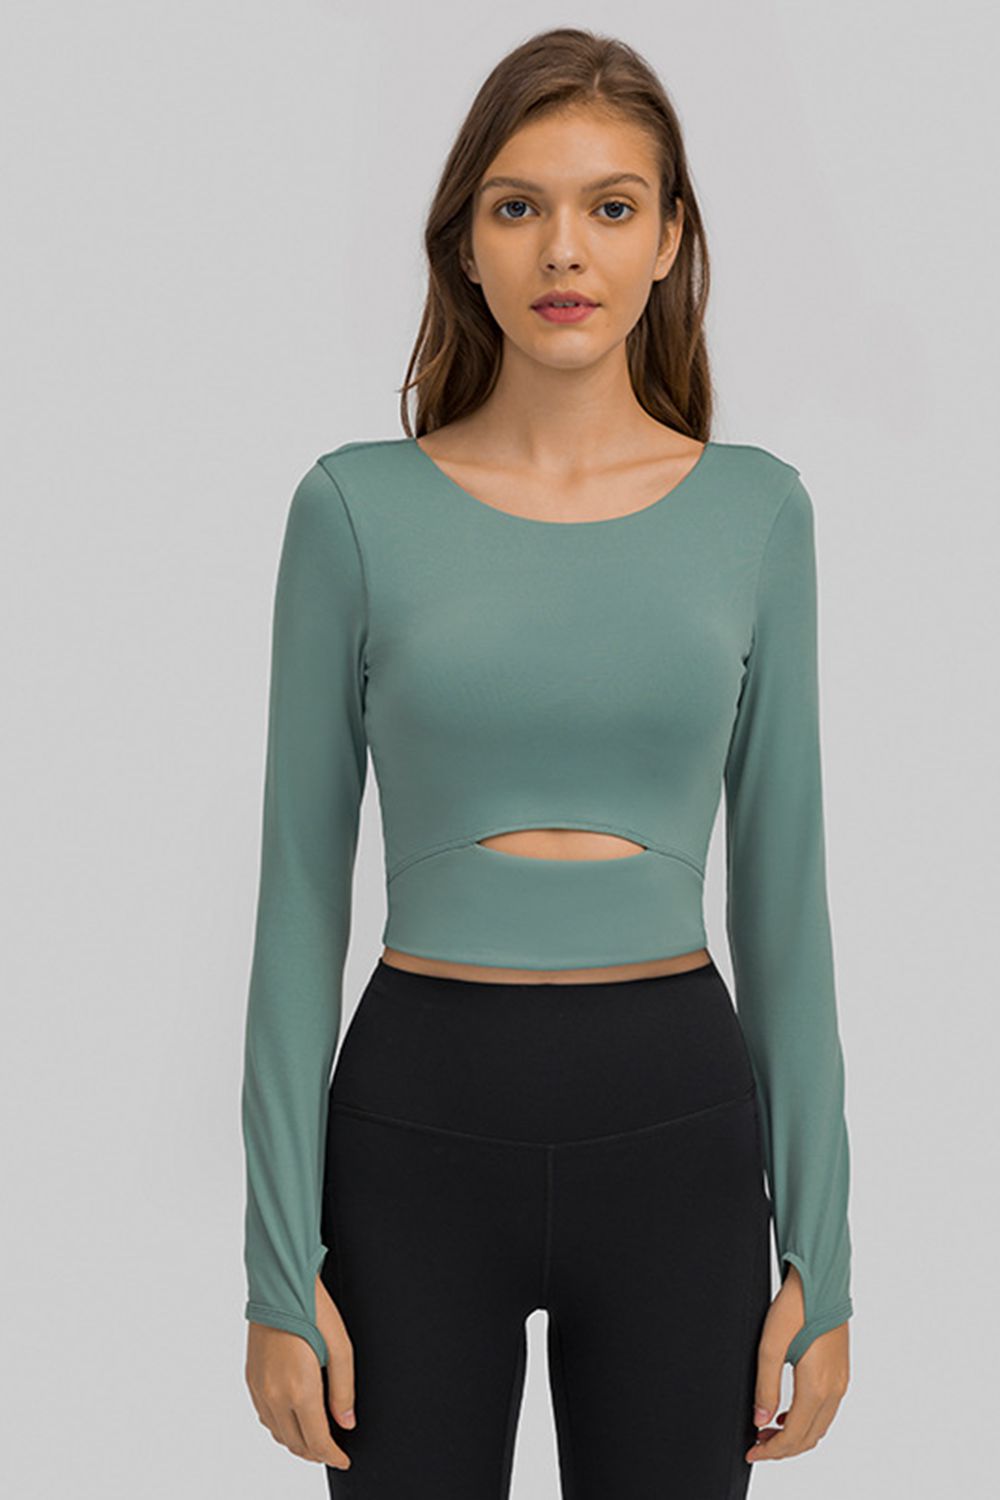 Cut Out Front Crop Yoga Tee - A Better You